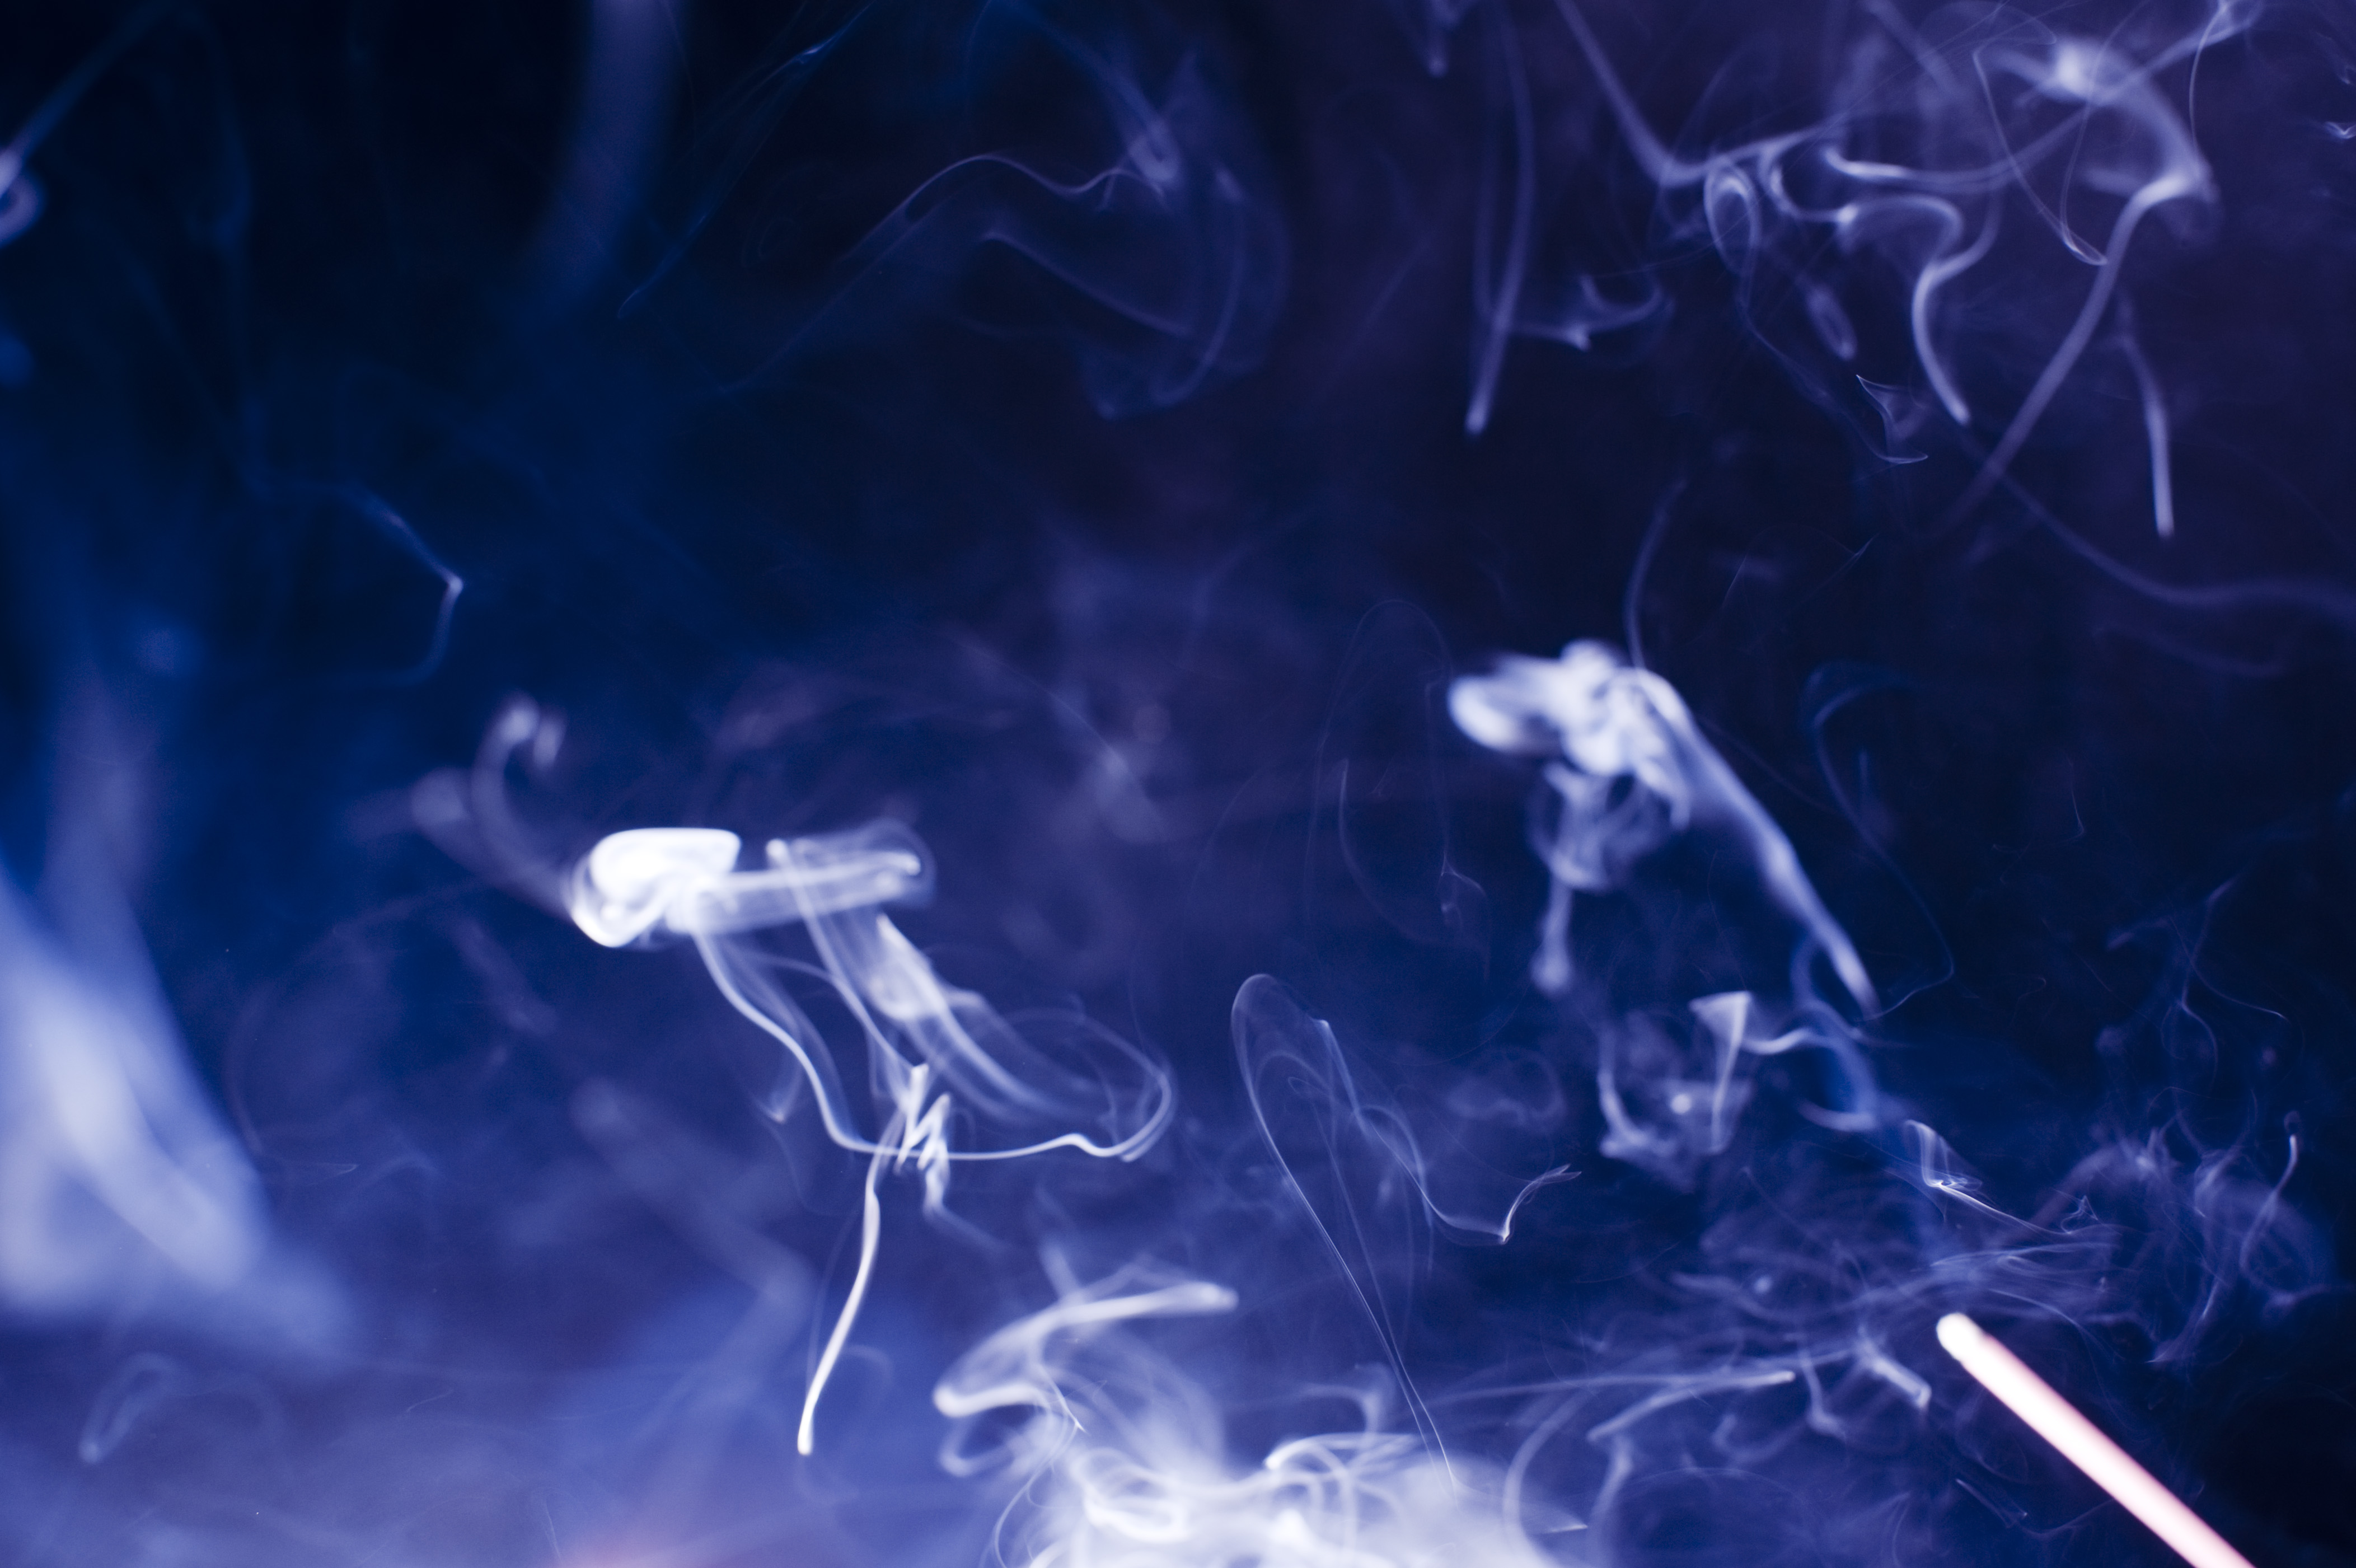 Smoke shapes Free backgrounds and textures Cr103.com